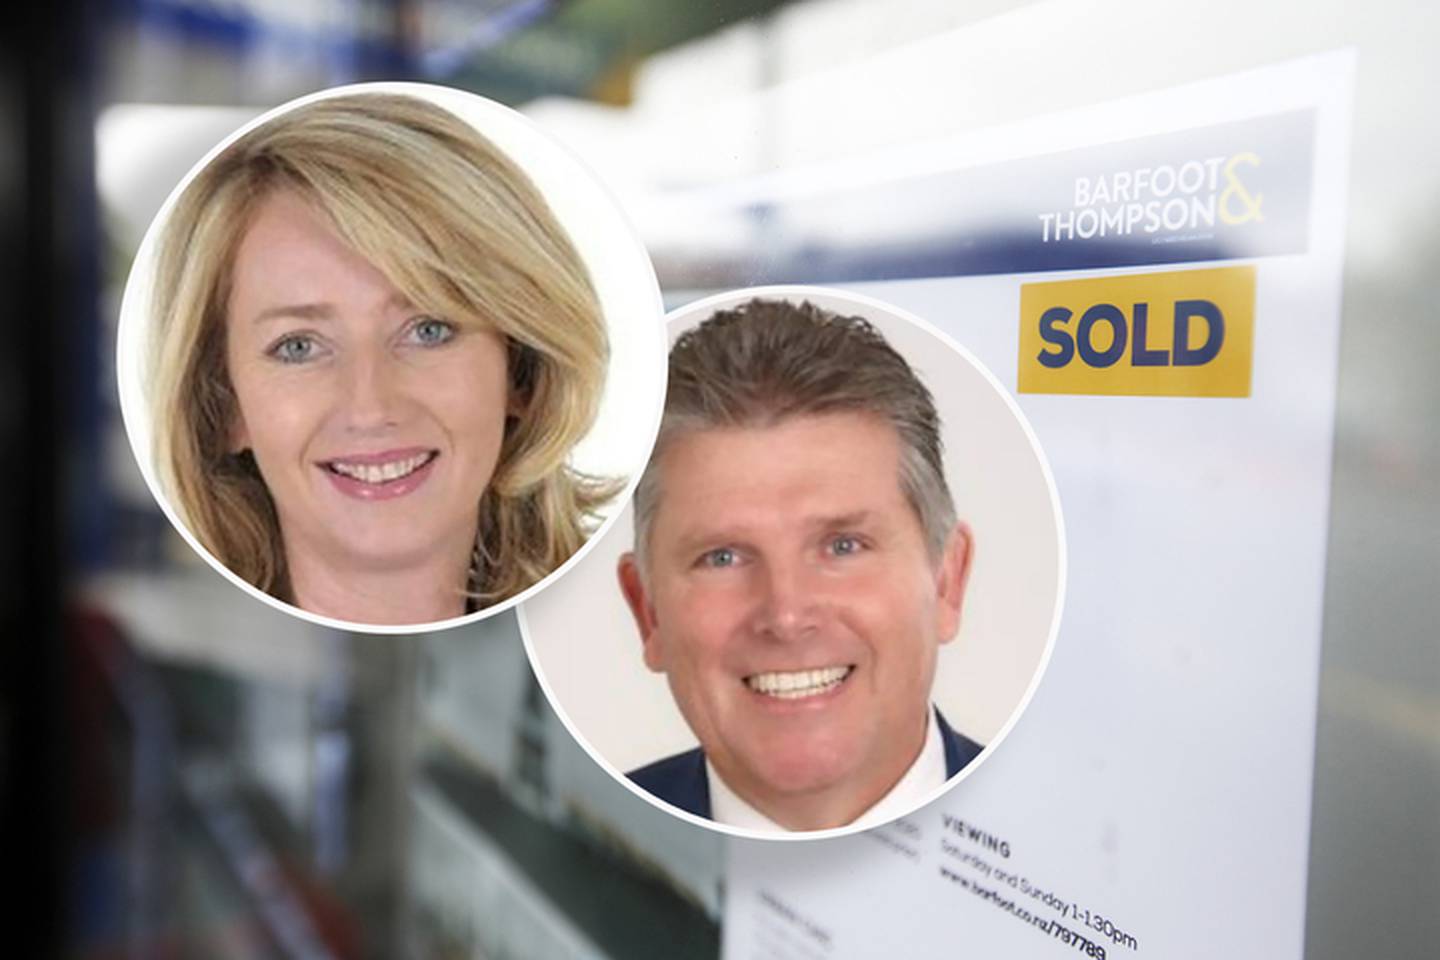 Lisa Edwards and Andy Lawrence were each fined $1000 by the Real Estate Authority. Photo / Barfoot and Thompson